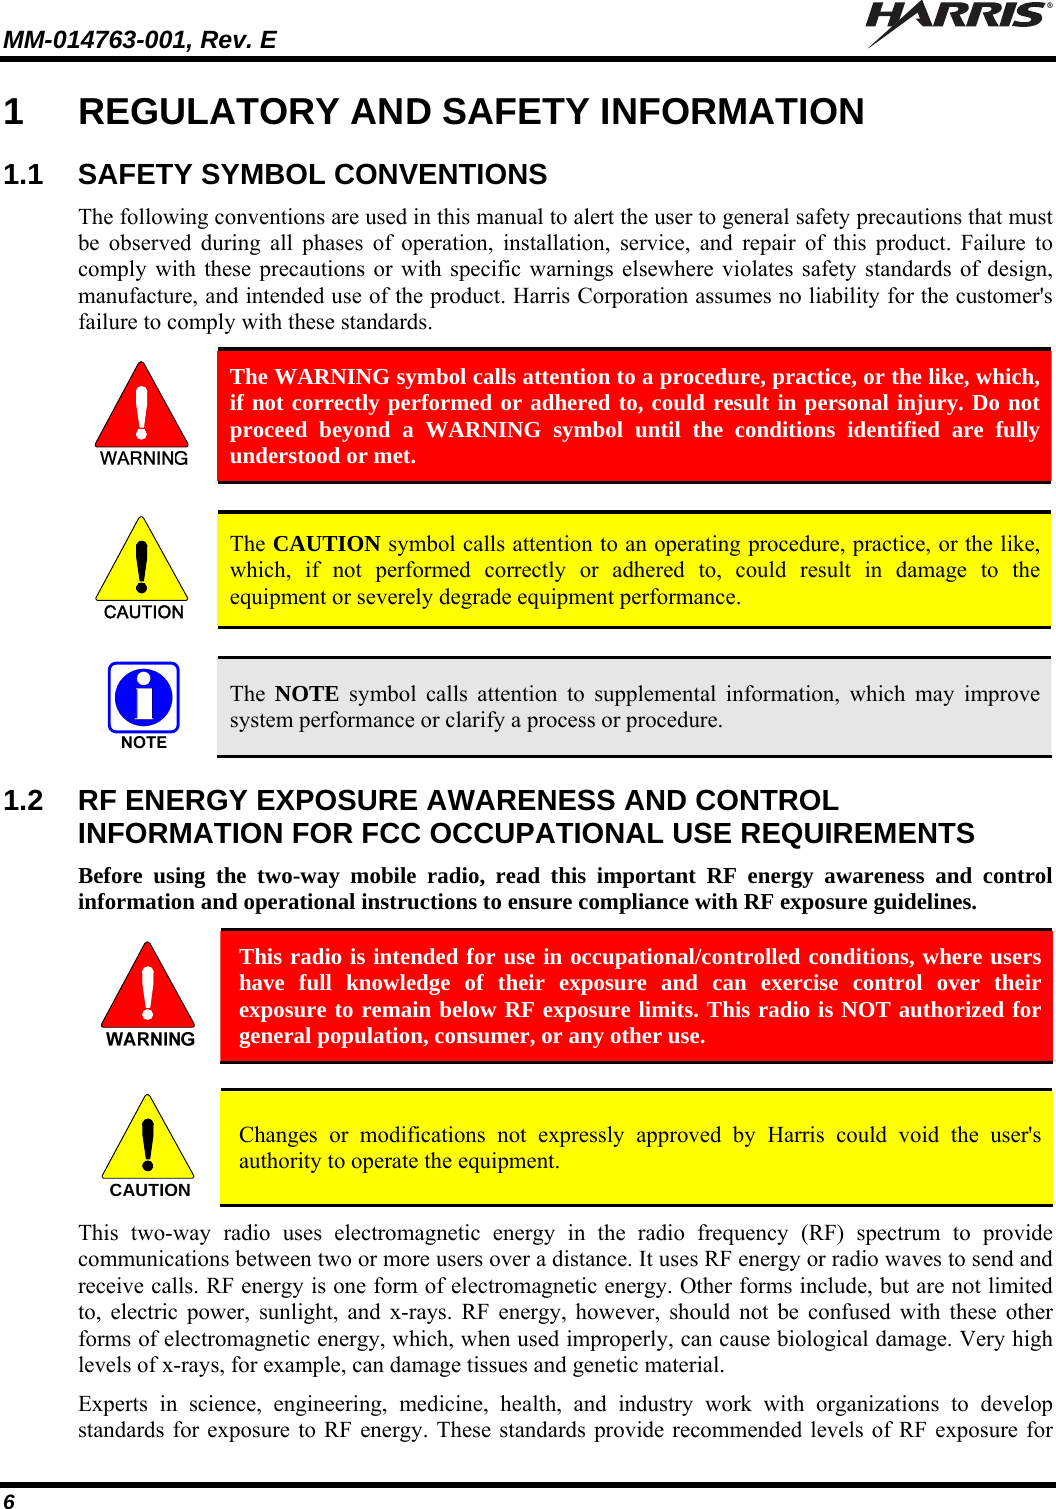 MM-014763-001, Rev. E   6 1  REGULATORY AND SAFETY INFORMATION 1.1  SAFETY SYMBOL CONVENTIONS The following conventions are used in this manual to alert the user to general safety precautions that must be observed during all phases of operation, installation, service, and repair of this product. Failure to comply with these precautions or with specific warnings elsewhere violates safety standards of design, manufacture, and intended use of the product. Harris Corporation assumes no liability for the customer&apos;s failure to comply with these standards.  The WARNING symbol calls attention to a procedure, practice, or the like, which, if not correctly performed or adhered to, could result in personal injury. Do not proceed beyond a WARNING symbol until the conditions identified are fully understood or met.   CAUTION  The CAUTION symbol calls attention to an operating procedure, practice, or the like, which, if not performed correctly or adhered to, could result in damage to the equipment or severely degrade equipment performance.    The  NOTE symbol calls attention to supplemental information, which may improve system performance or clarify a process or procedure. 1.2  RF ENERGY EXPOSURE AWARENESS AND CONTROL INFORMATION FOR FCC OCCUPATIONAL USE REQUIREMENTS Before using the two-way mobile radio, read this important RF energy awareness and control information and operational instructions to ensure compliance with RF exposure guidelines.  This radio is intended for use in occupational/controlled conditions, where users have full knowledge of their exposure and can exercise control over their exposure to remain below RF exposure limits. This radio is NOT authorized for general population, consumer, or any other use.  CAUTION  Changes or modifications not expressly approved by Harris could void the user&apos;s authority to operate the equipment. This two-way radio uses electromagnetic energy in the radio frequency (RF) spectrum to provide communications between two or more users over a distance. It uses RF energy or radio waves to send and receive calls. RF energy is one form of electromagnetic energy. Other forms include, but are not limited to, electric power, sunlight, and x-rays. RF energy, however, should not be confused with these other forms of electromagnetic energy, which, when used improperly, can cause biological damage. Very high levels of x-rays, for example, can damage tissues and genetic material. Experts in science, engineering, medicine, health, and industry work with organizations to develop standards for exposure to RF energy. These standards provide recommended levels of RF exposure for 